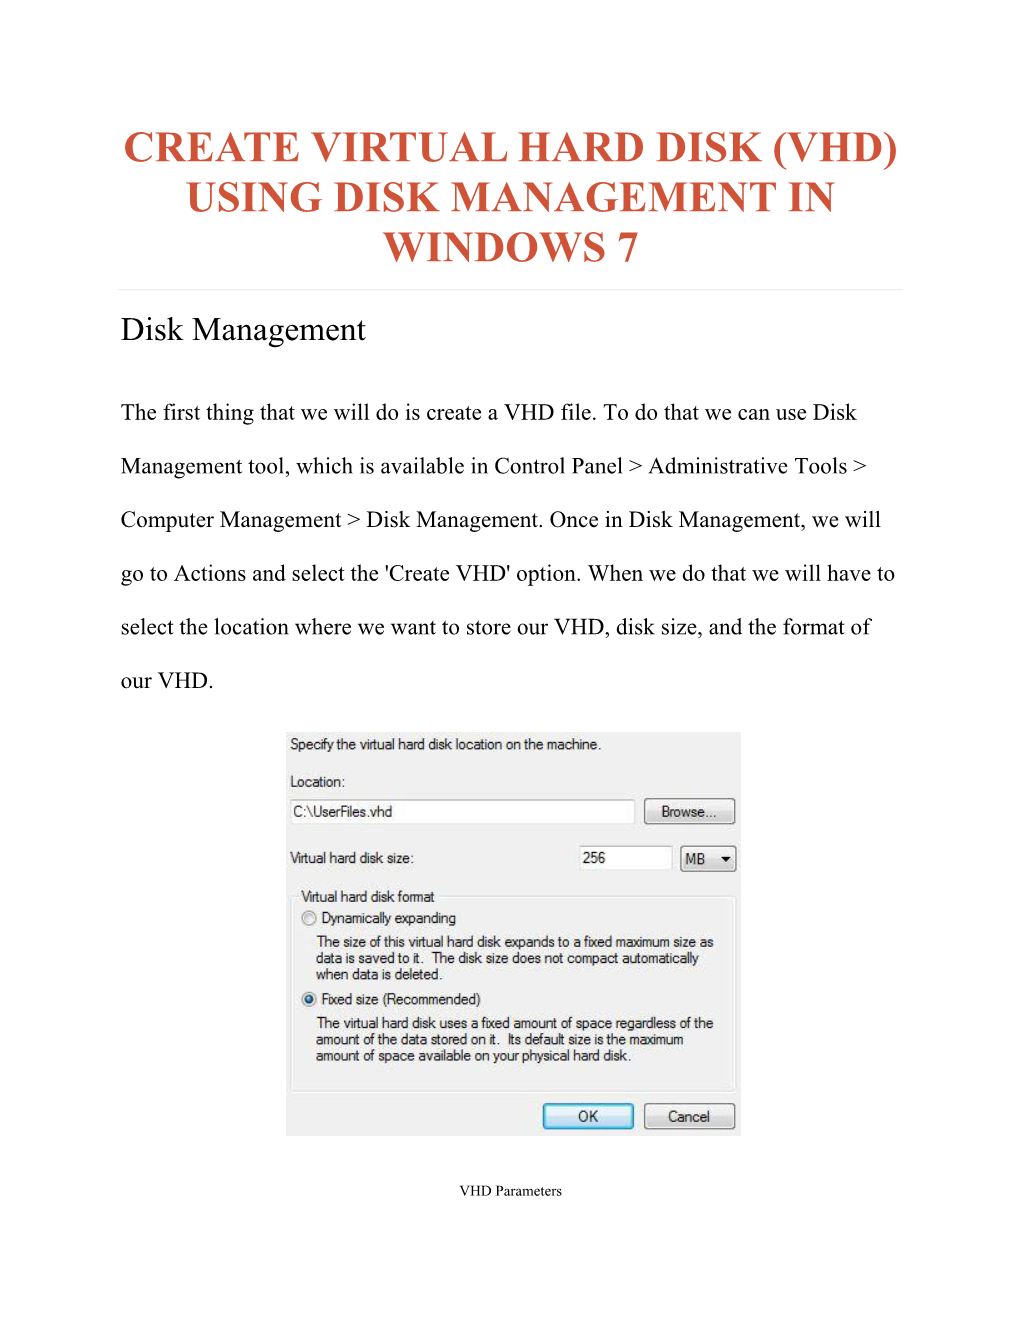 Create Virtual Hard Disk (Vhd) Using Disk Management in Windows 7